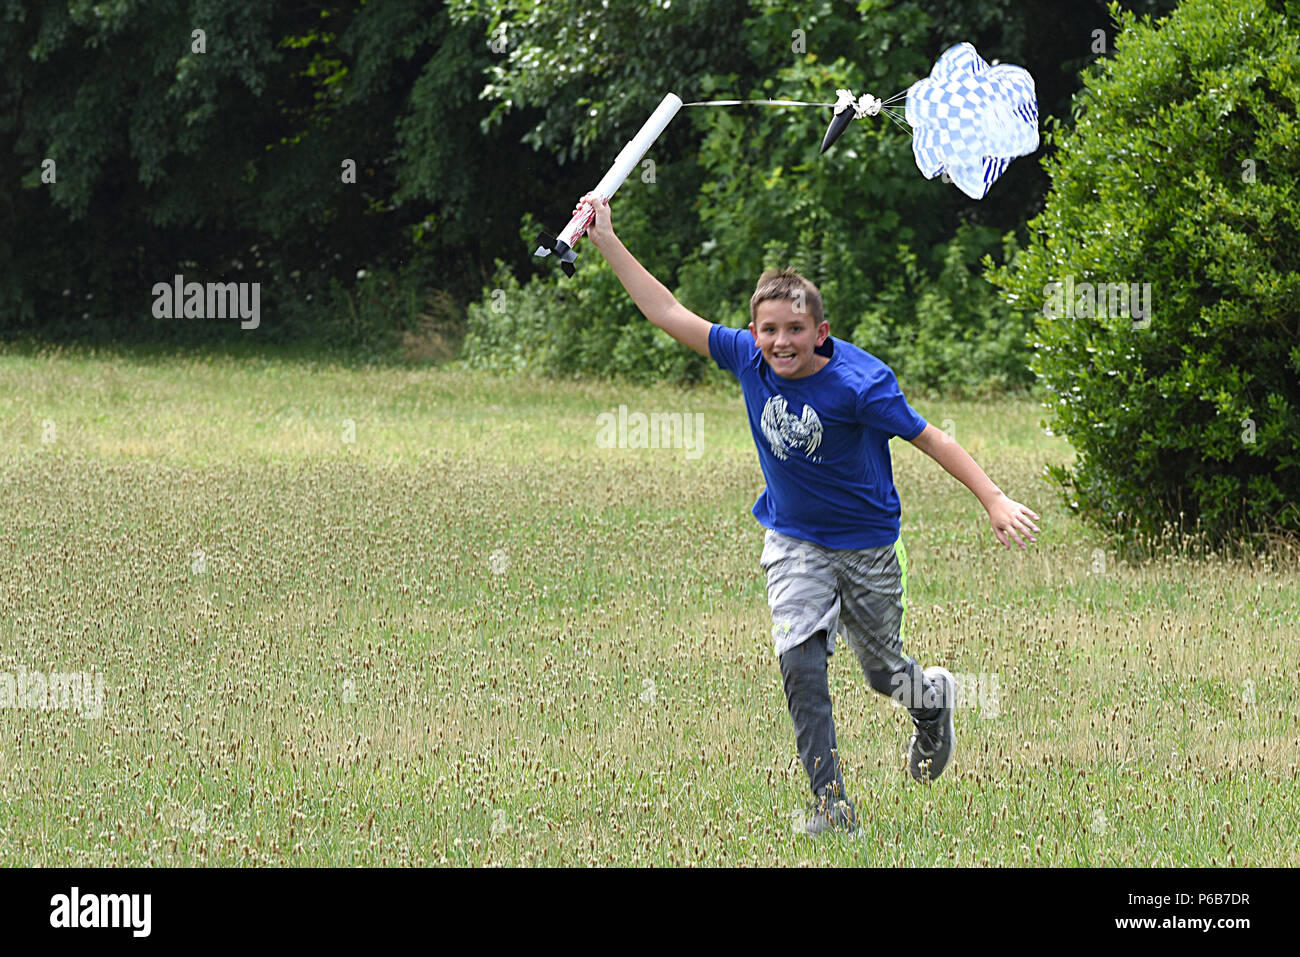 Louis Helms, son of U.S. Air Force Major Jeannie Helms, 145th Comptroller Flight commander, launches and catches his model rocket near Reid Park Academy Charlotte, N.C., June 21, 2018. Helms, along with other campers and teachers are part of the annual Department of Defense STARBASE summer camp program with the North Carolina Air National Guard and they learn various applications of science, technology, engineering, and math. Stock Photo